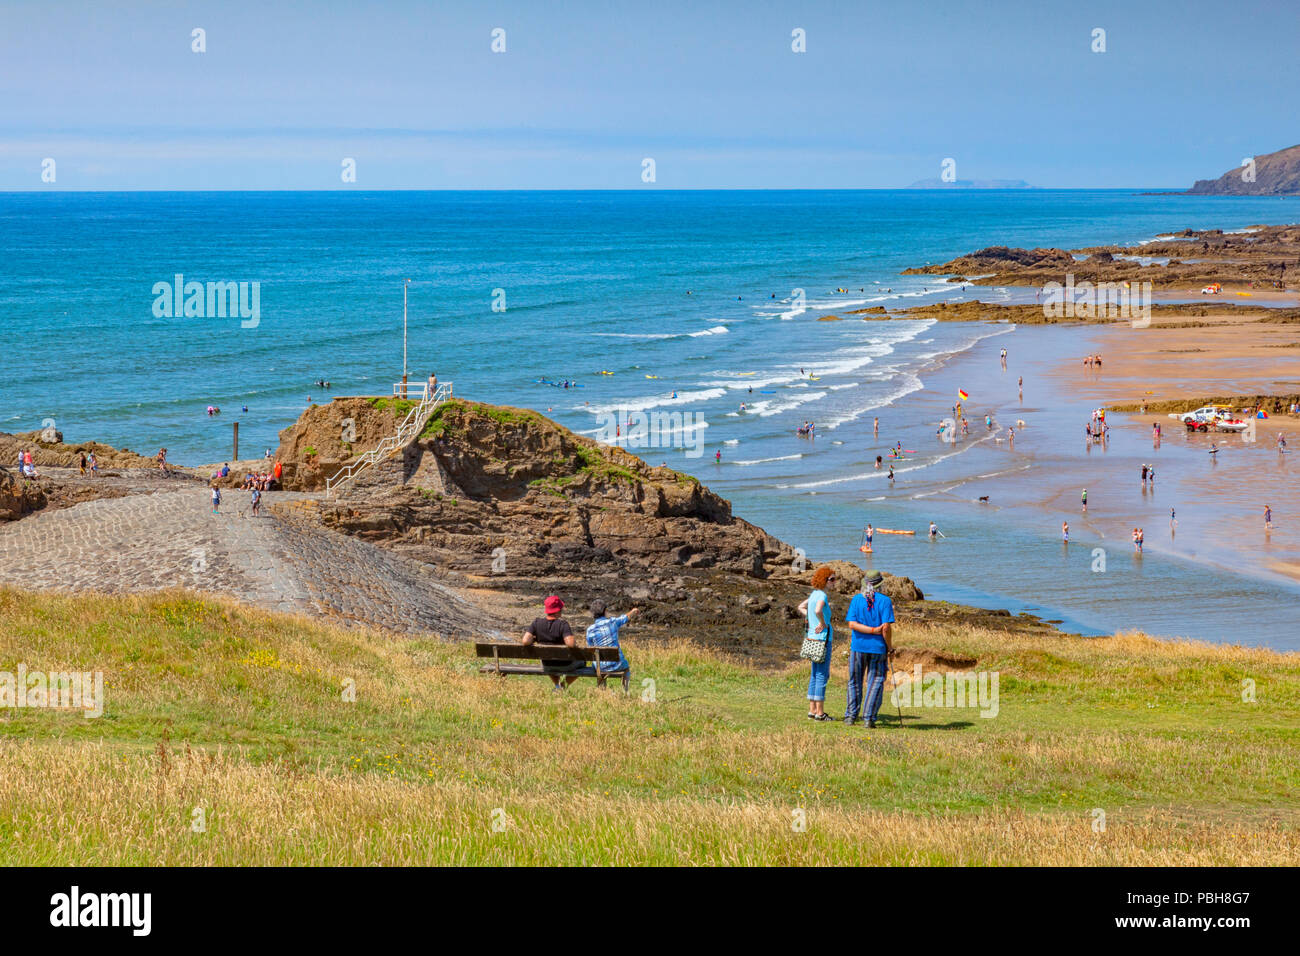 6 July 2018: Bude, Cornwall, UK - Tourists on Compass Hill looking down over busy Summerleaze Beach during the summer heatwave, as people cool off in  Stock Photo